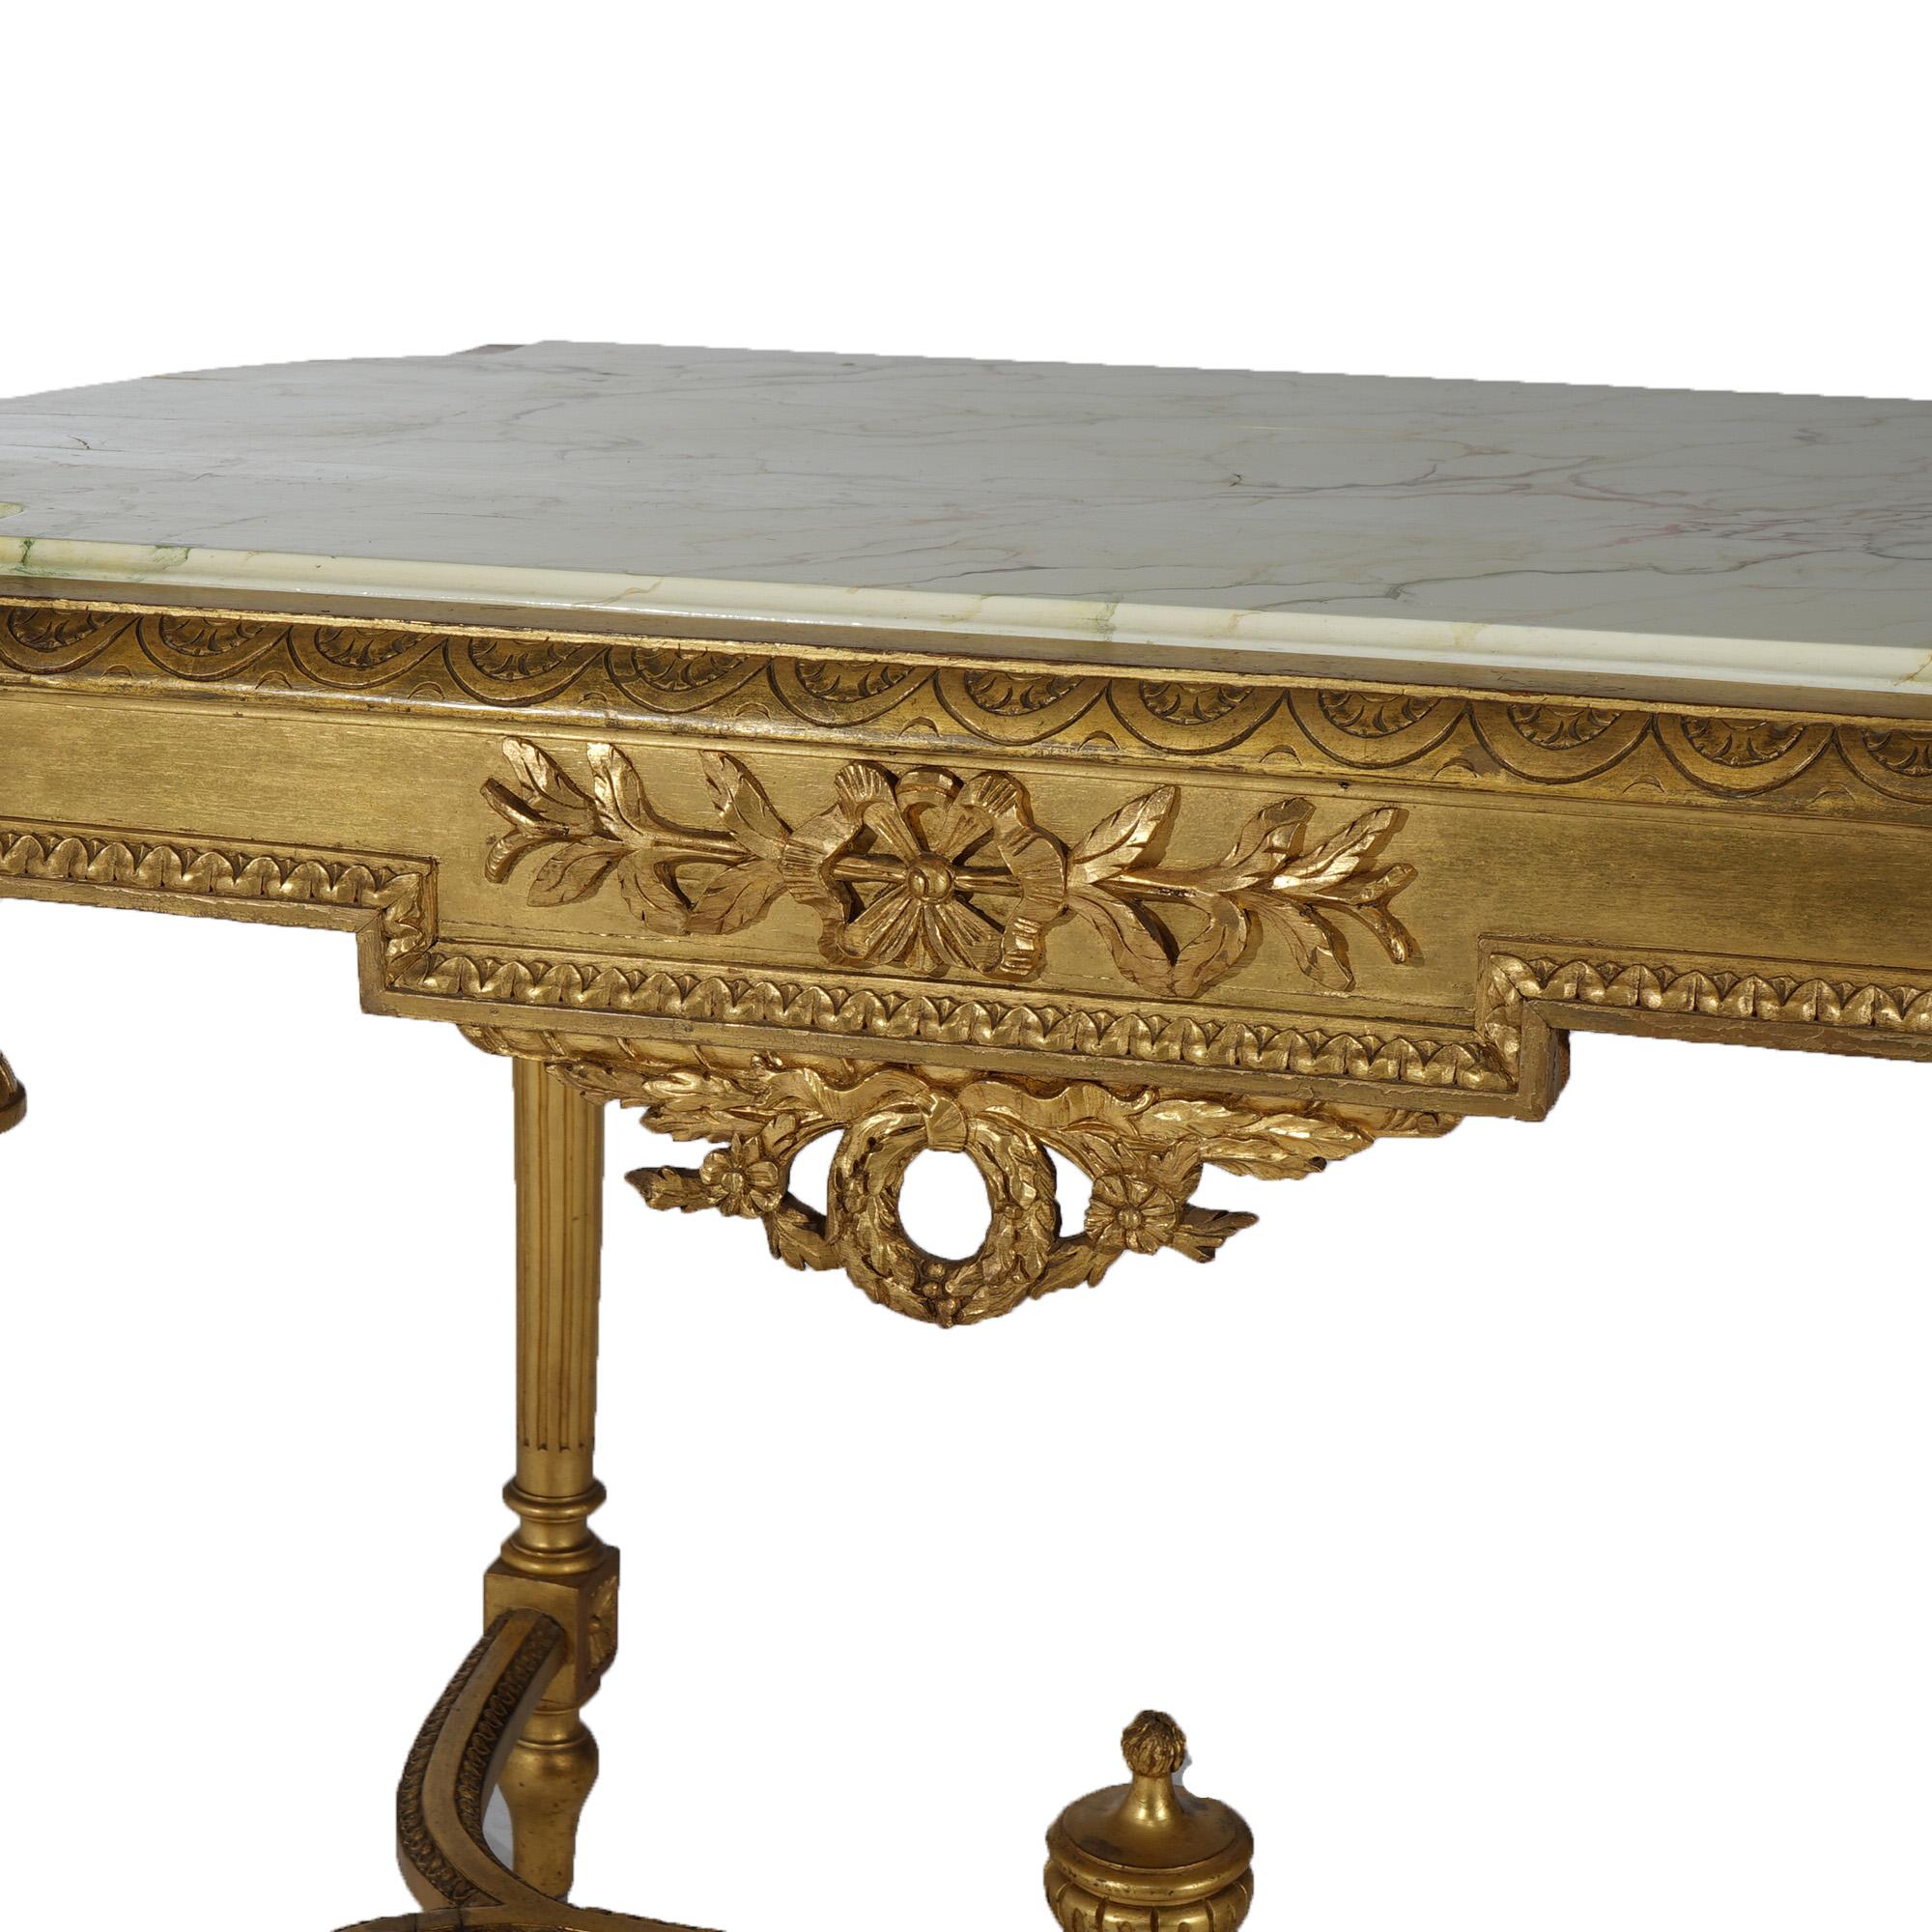 Antique French Louis XVI Style Giltwood Parlor Table with Faux Painted Top 19thC 15